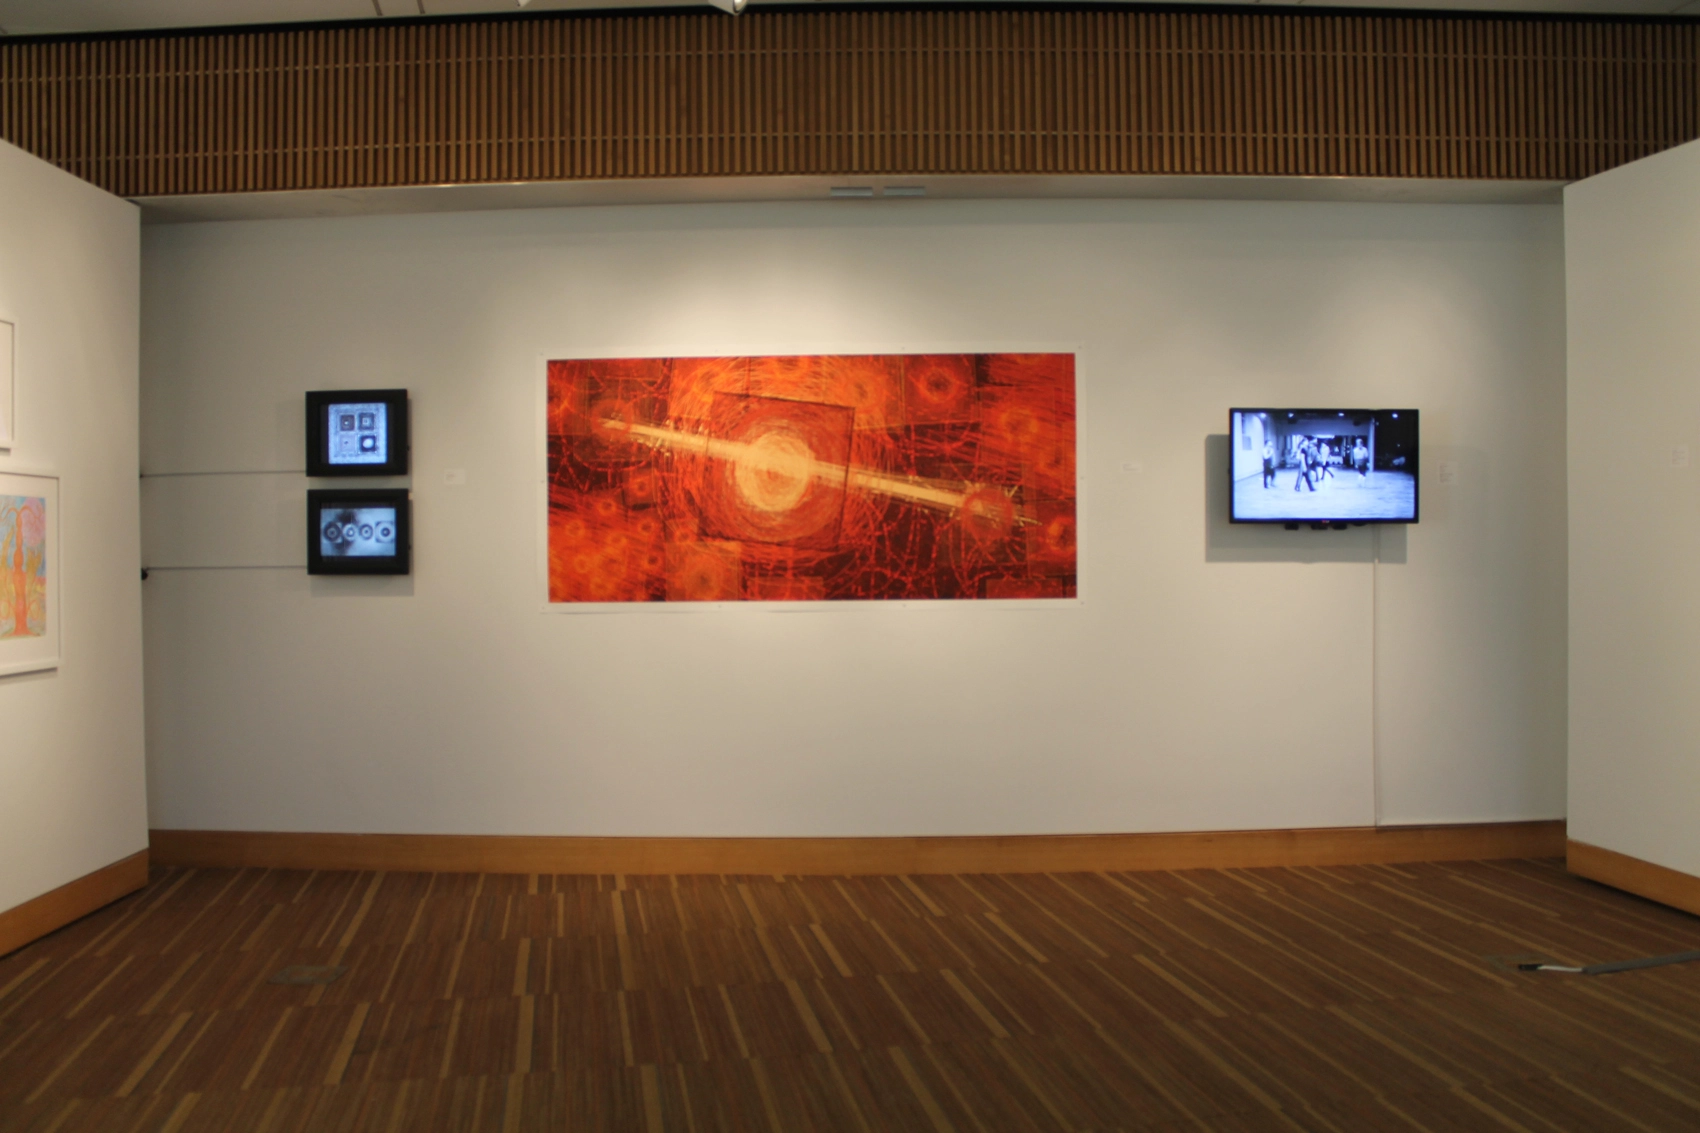 installation view from "Band of Artists: Spectrum Order Disorder," 2014, Commons Art Gallery